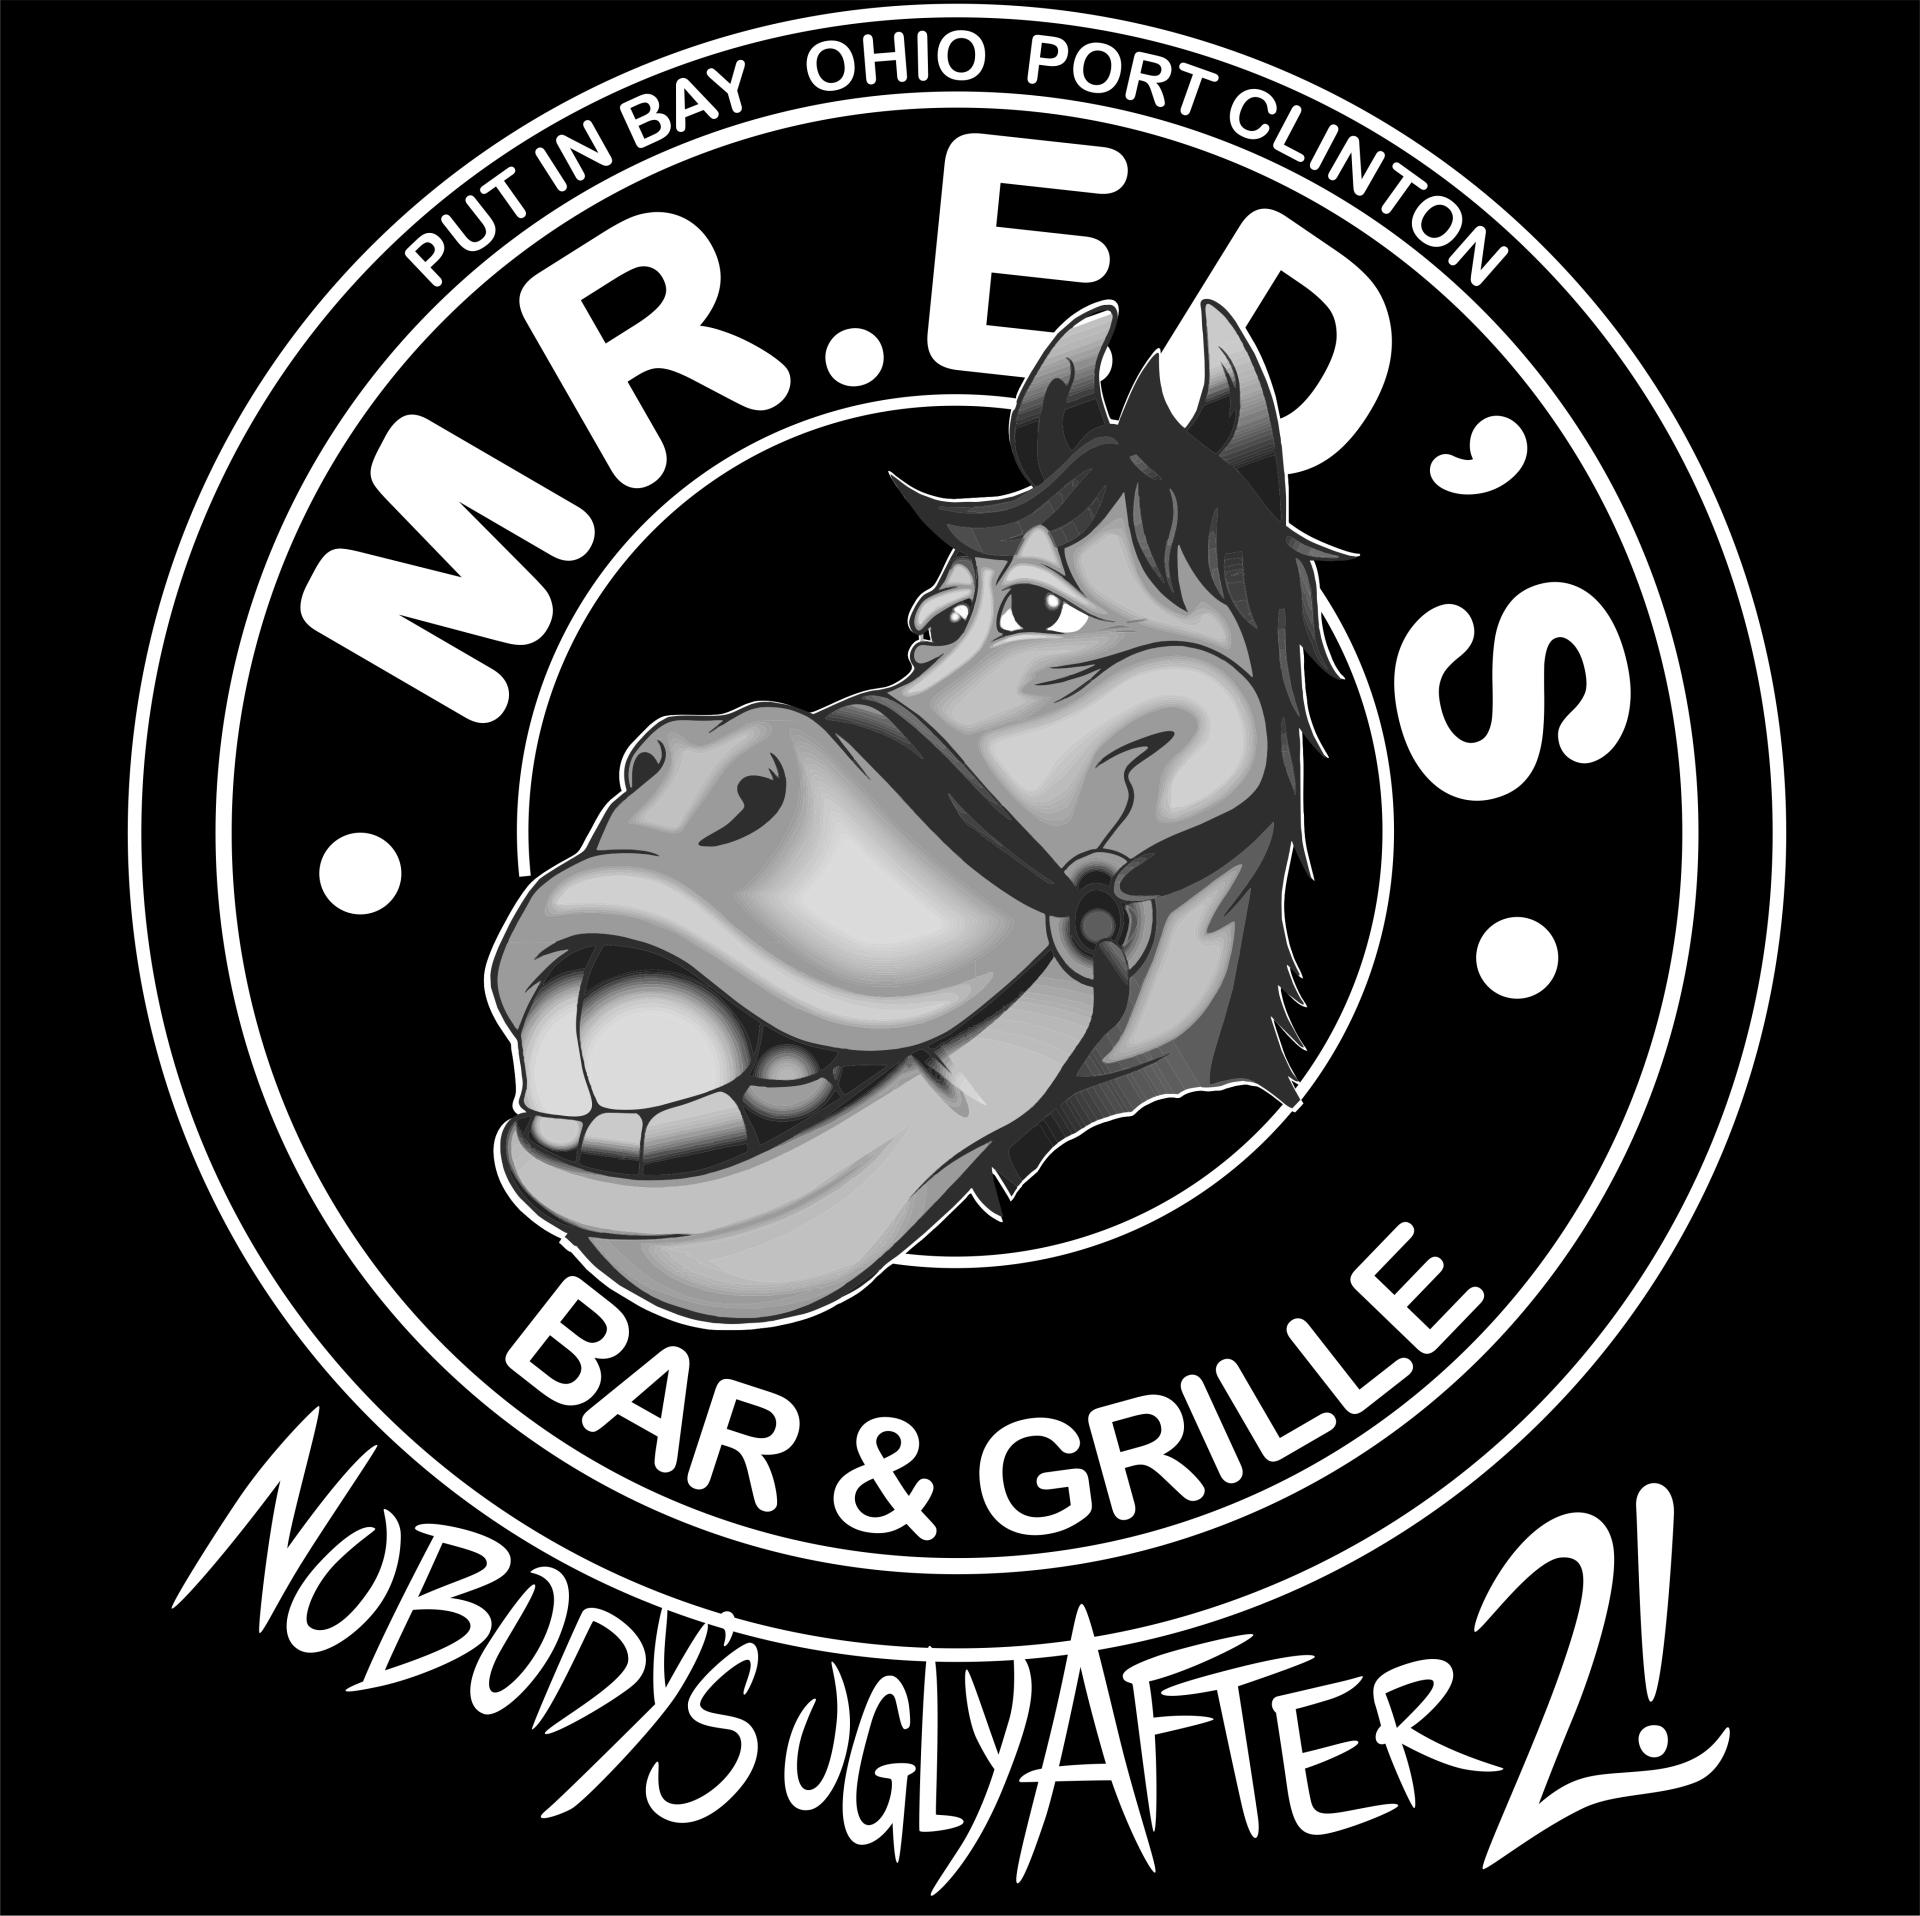 Mr Ed's Bar and Grille Logo - Put-in-Bay, Ohio